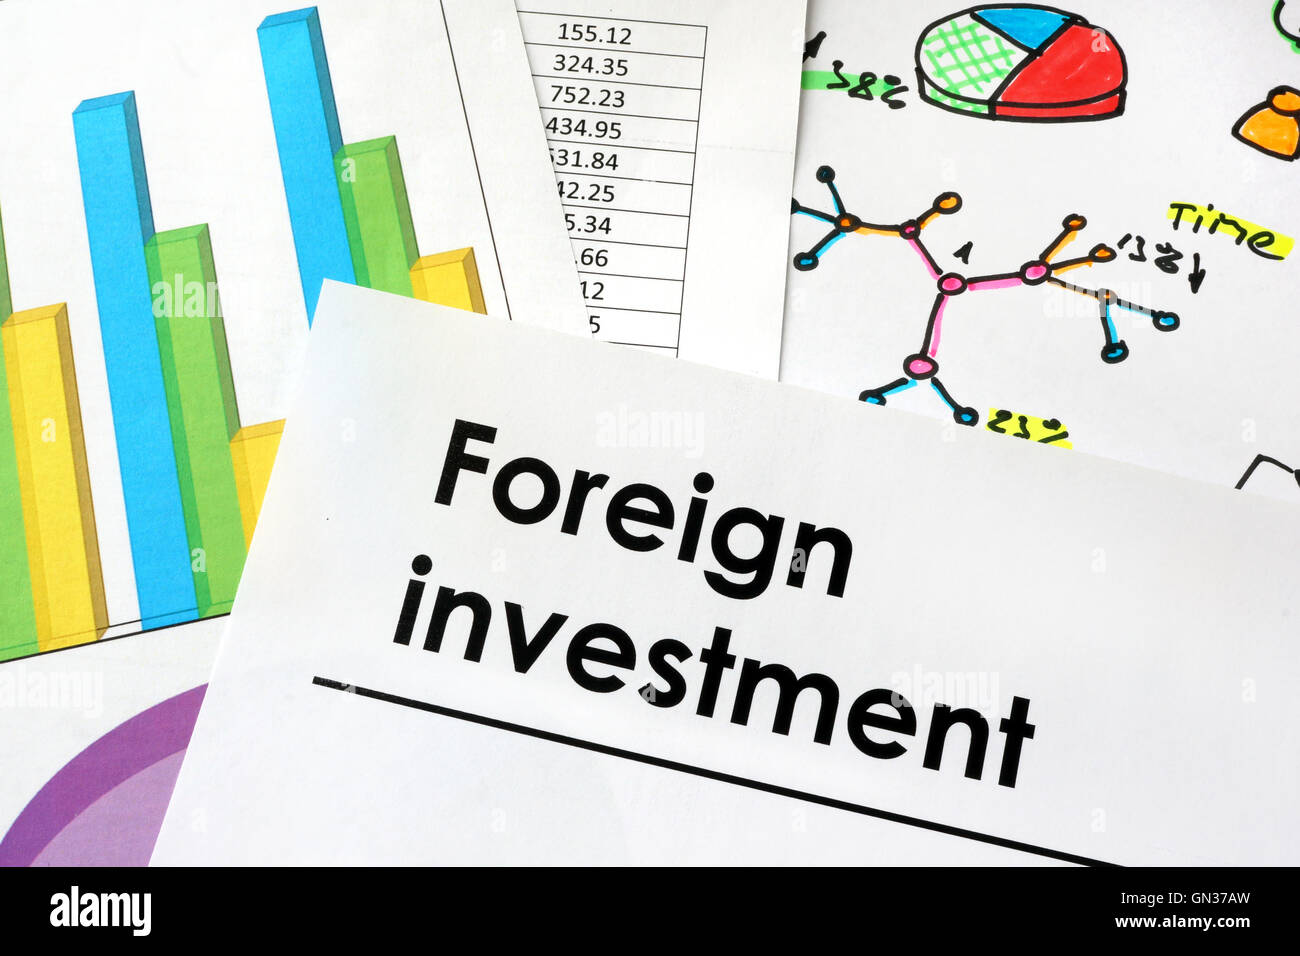 Foreign investment sign written on a paper. Stock Photo